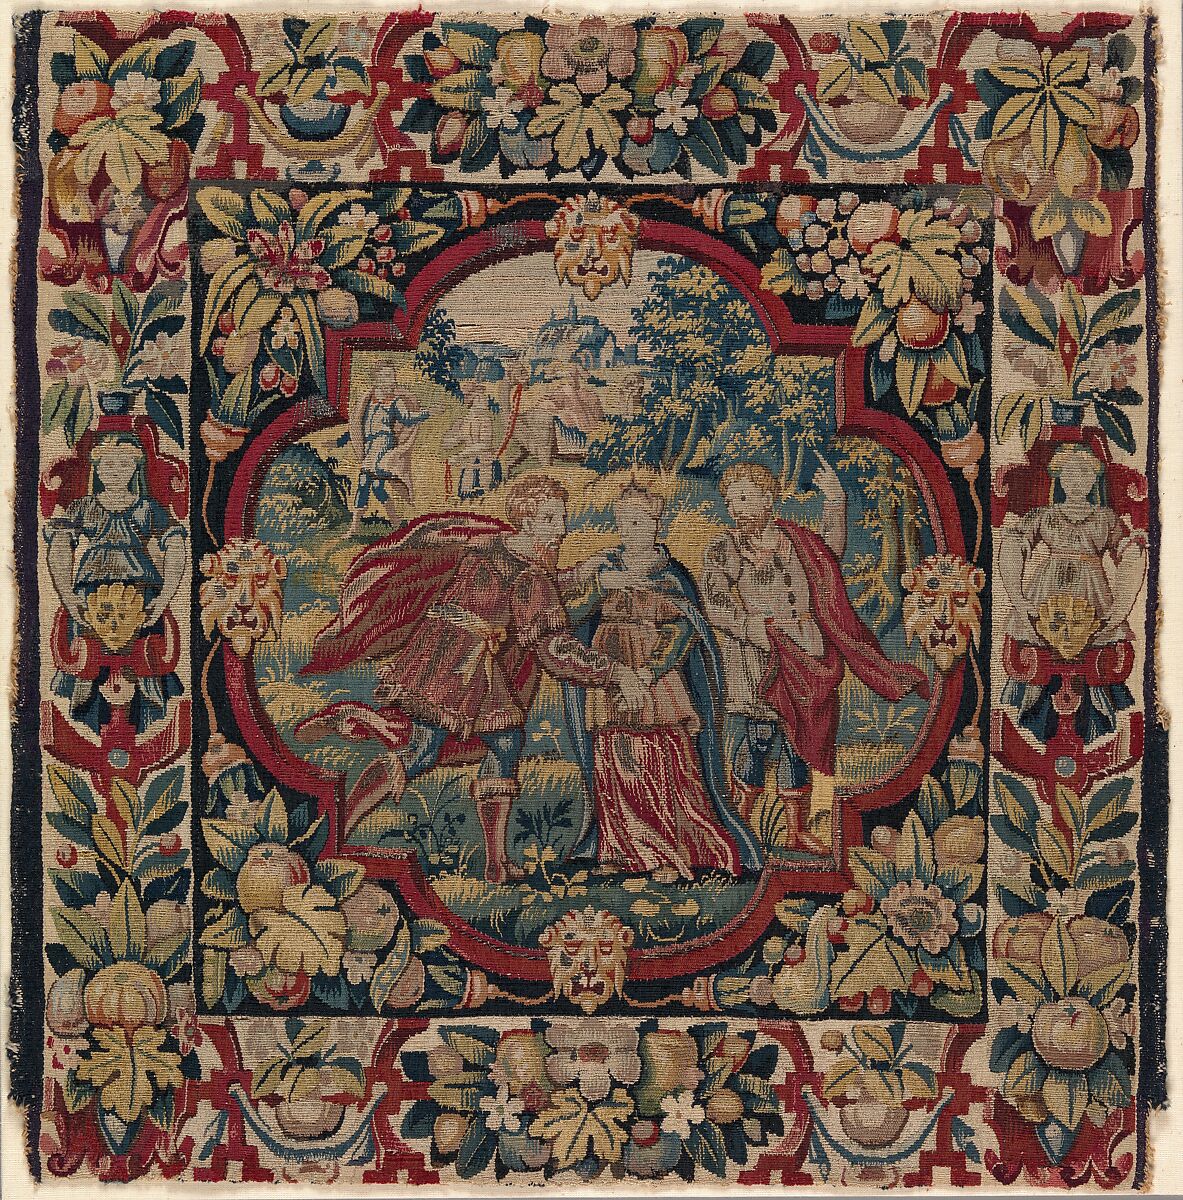 The Meeting of Isaac and Rebekah from the Story of Abraham, Wool, silk, silver-gilt thread (21 warps per inch, 9 per cm.), Flemish 